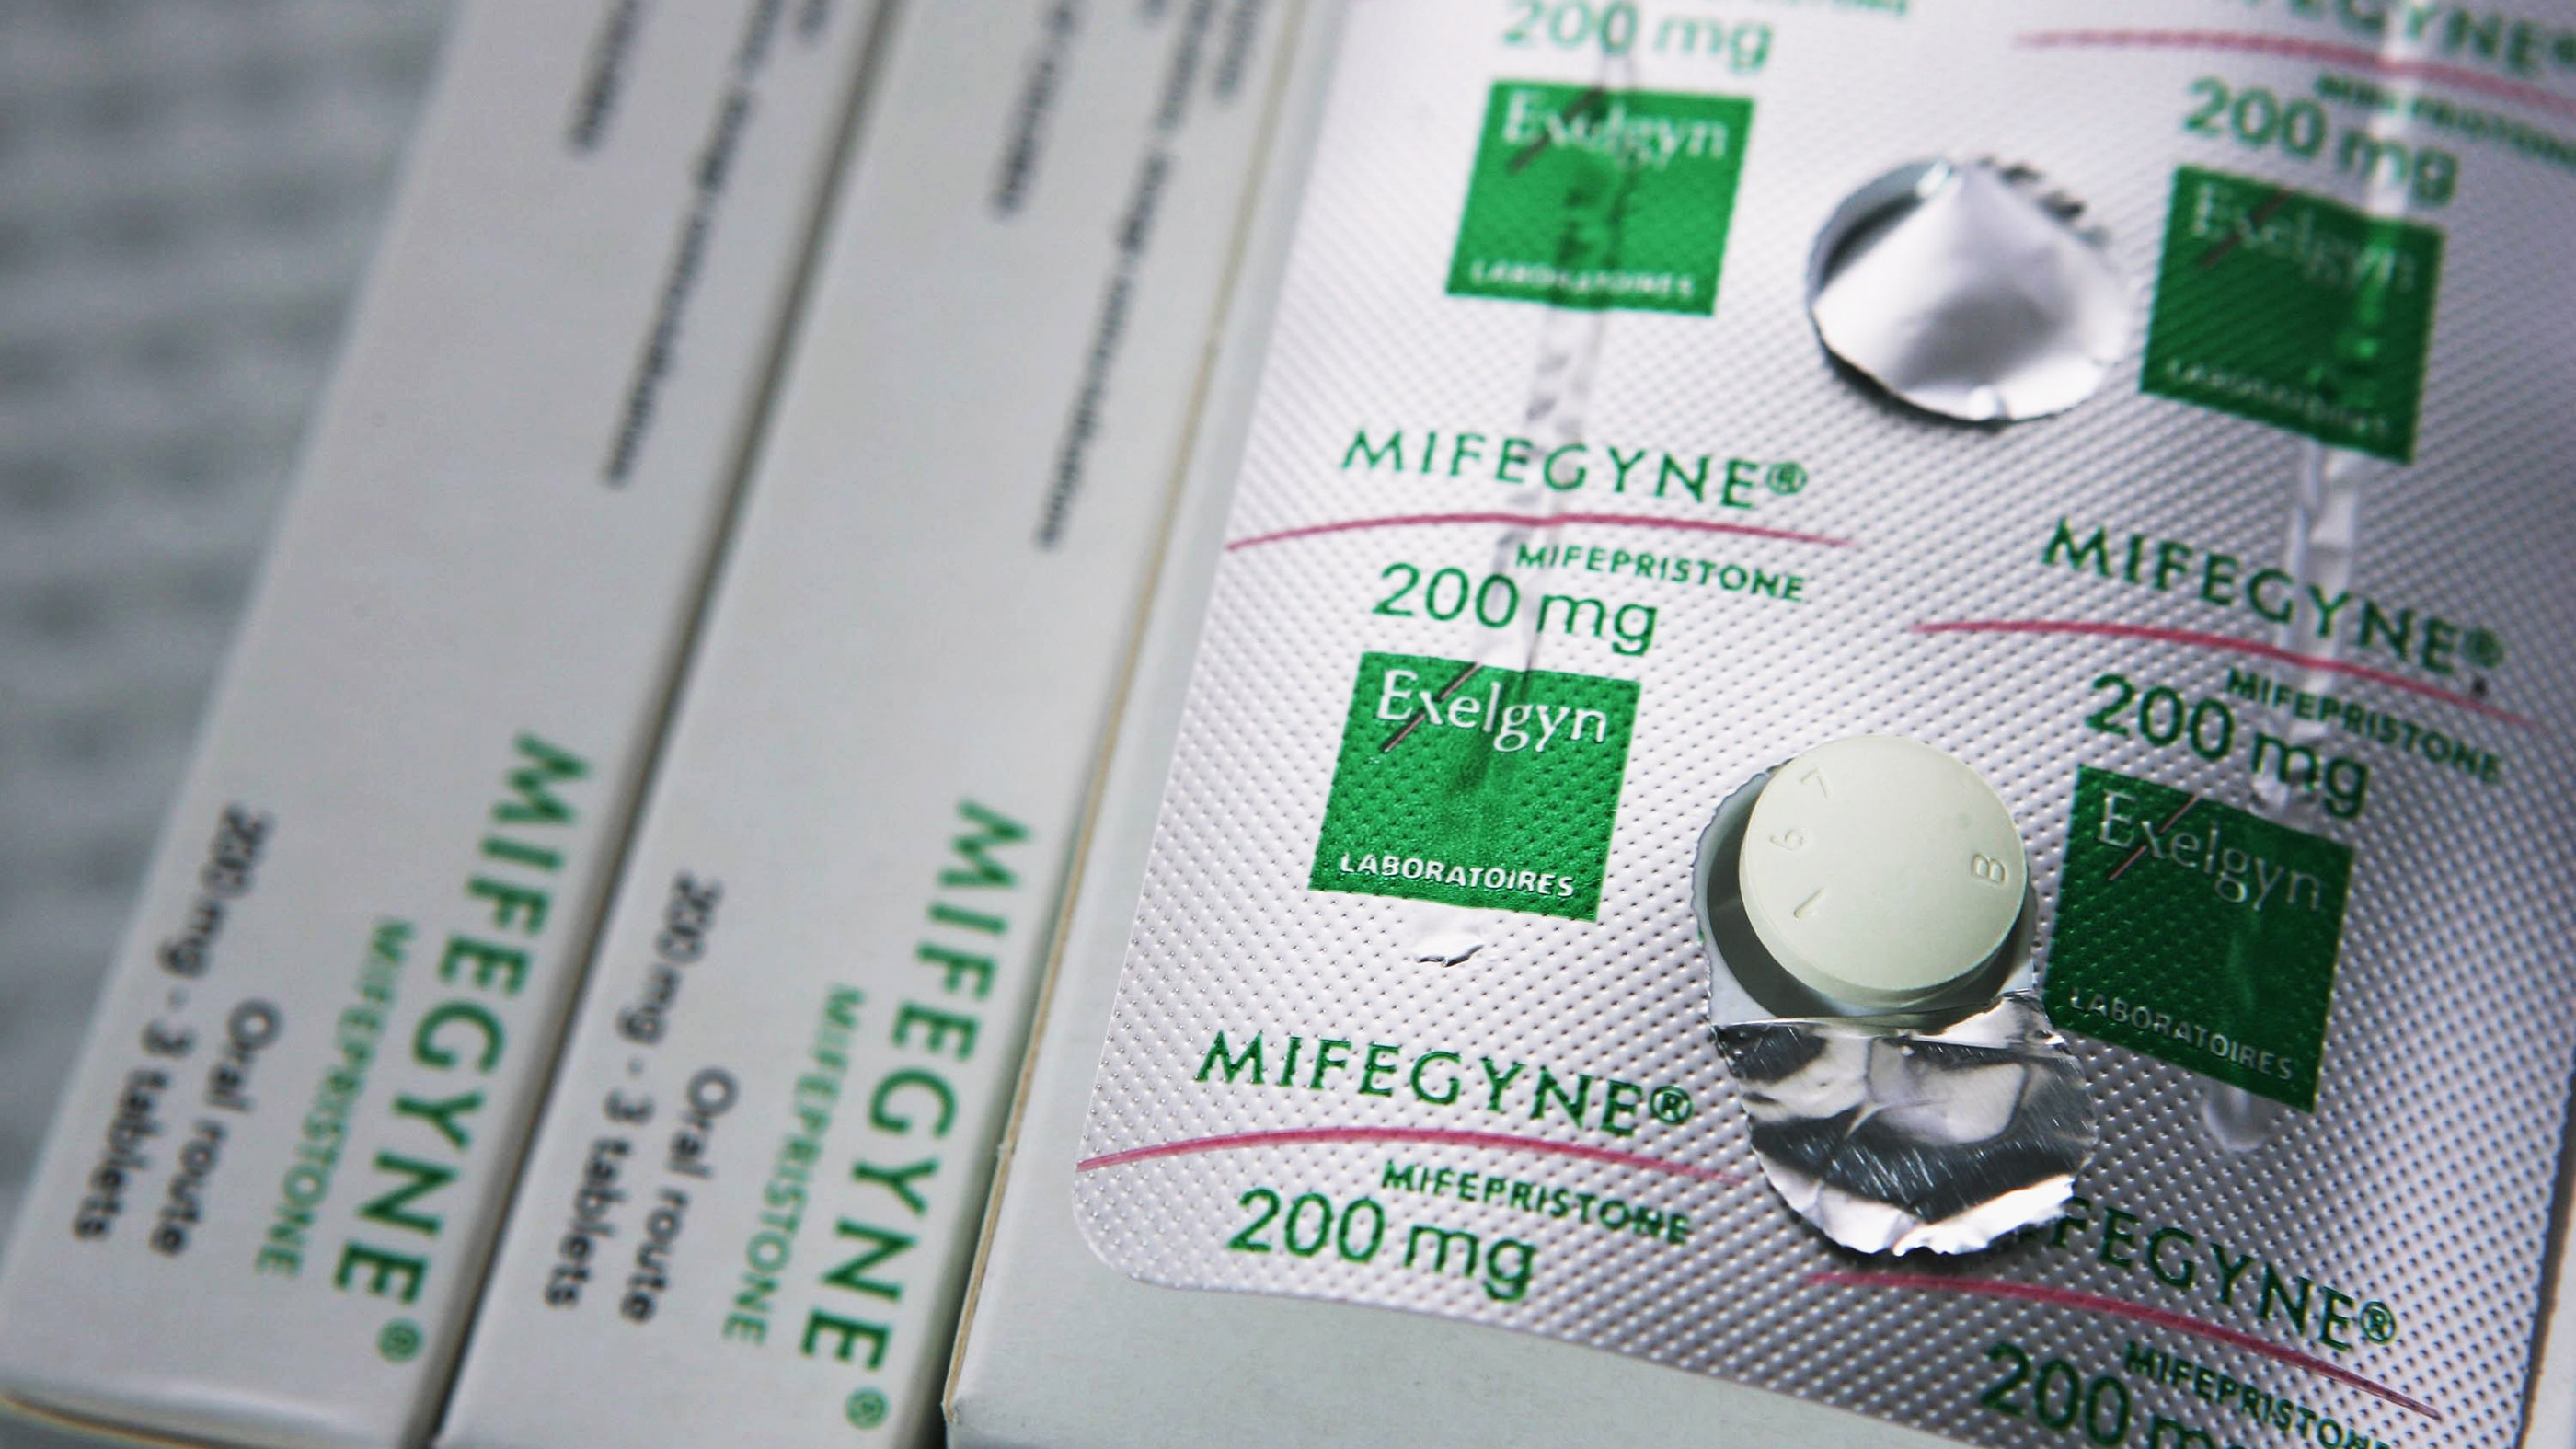 The abortion drug Mifepristone, also known as RU486, is pictured in an abortion clinic in Auckland, New Zealand.